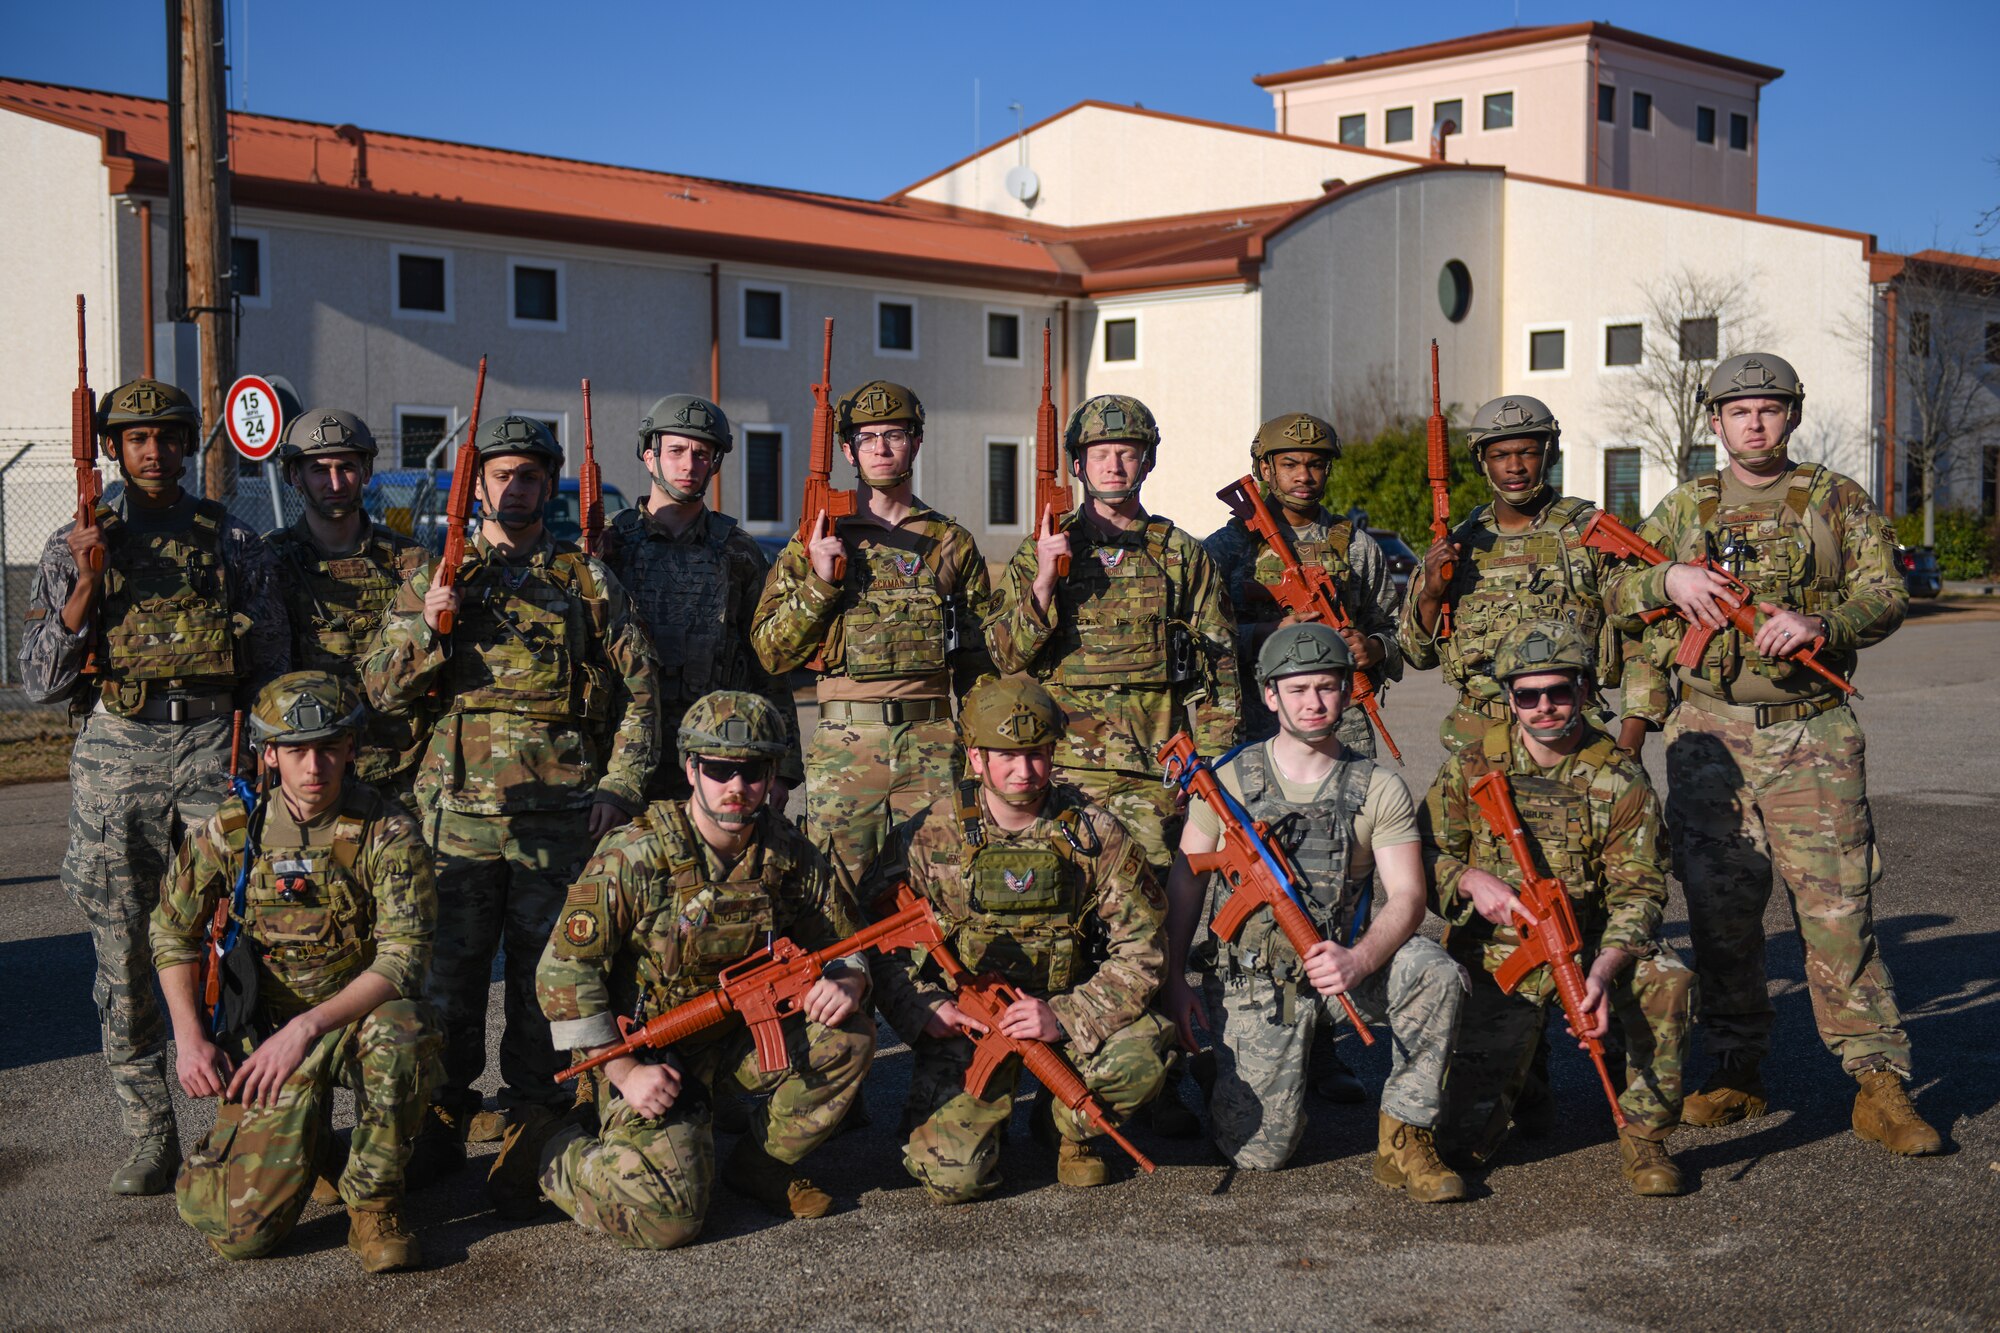 U.S. Airmen from the 31st Security Forces Squadron pose for a photo at Aviano Air Base, Italy, Feb. 14, 2020. The 31st SFS maintains installation force protection during peacetime and wartime operations within eight separate base areas. (U.S. Air Force photo by Airman 1st Class Ericka A. Woolever)